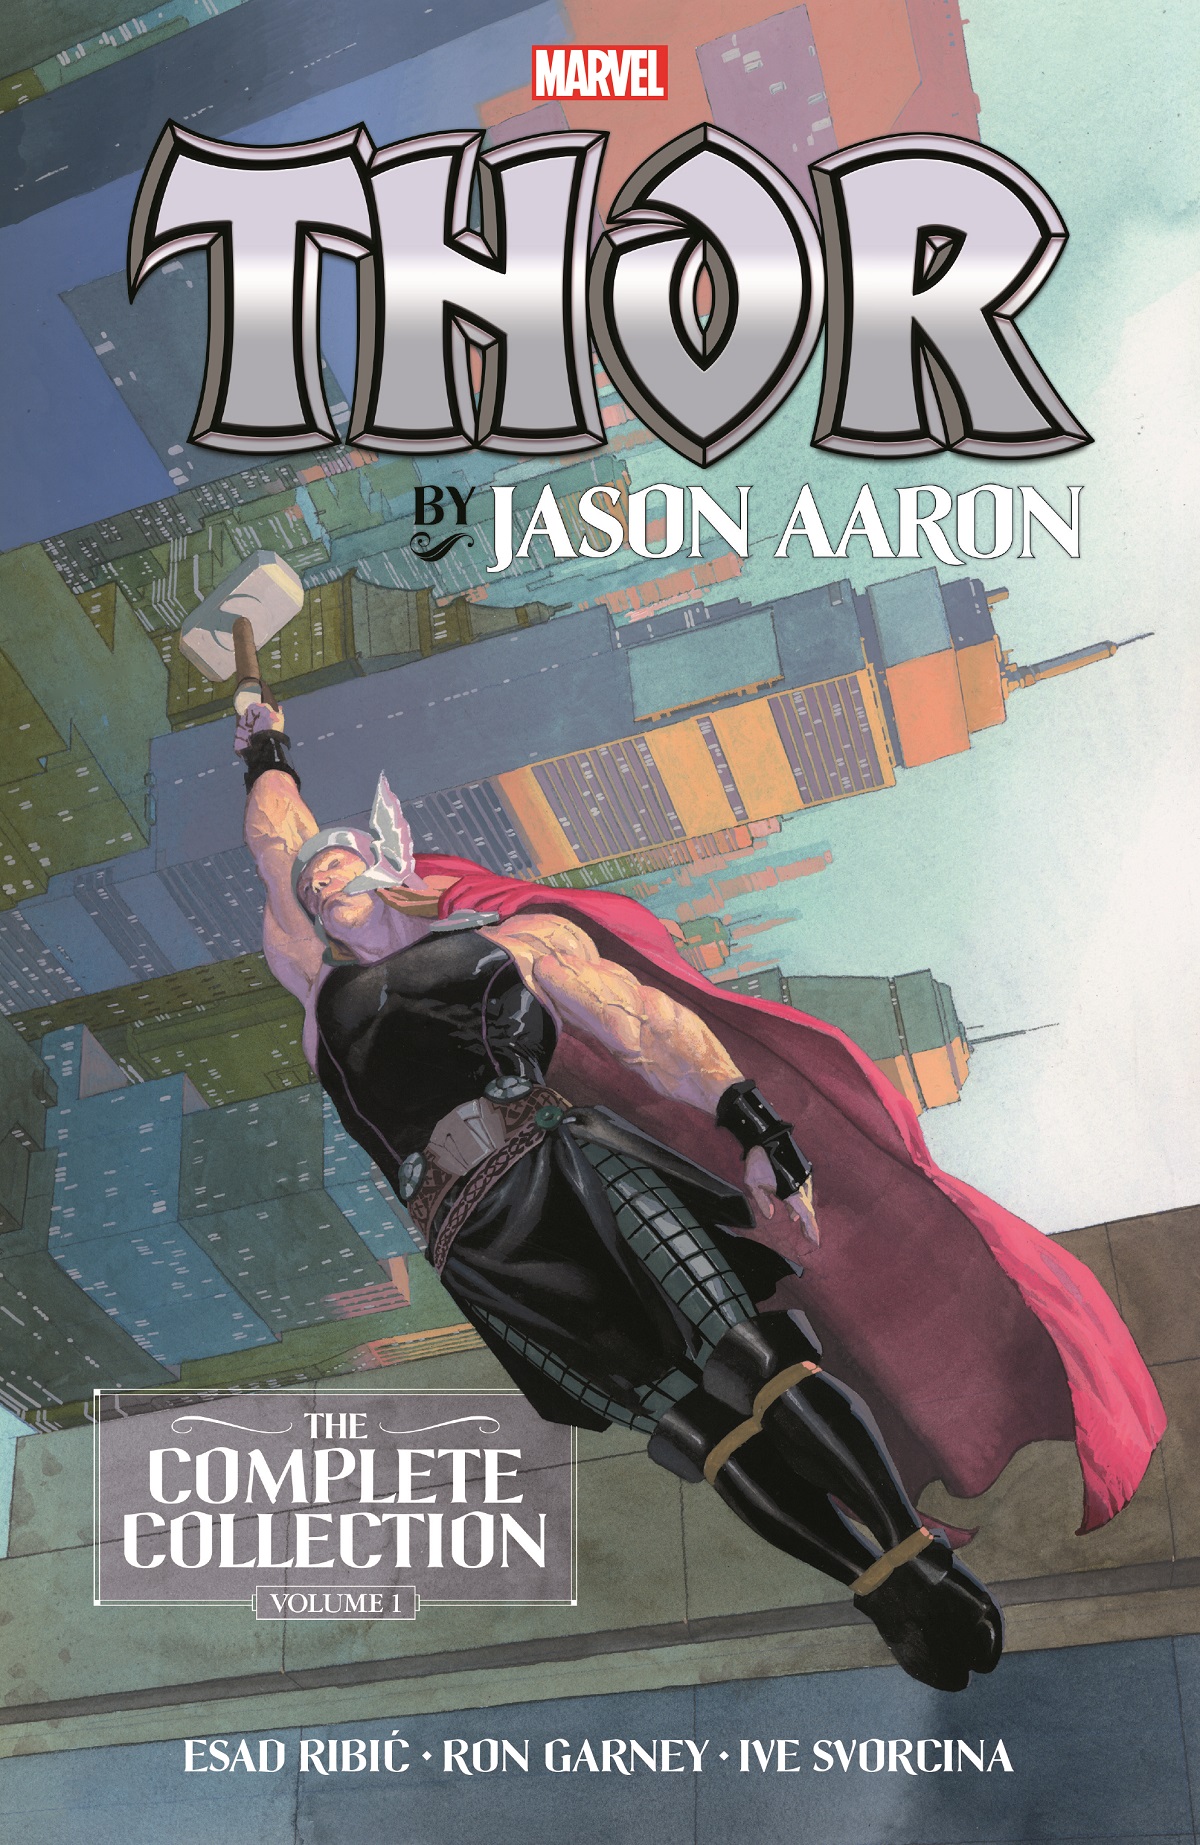 Thor by Jason Aaron: The Complete Collection Vol. 1 (Trade Paperback)